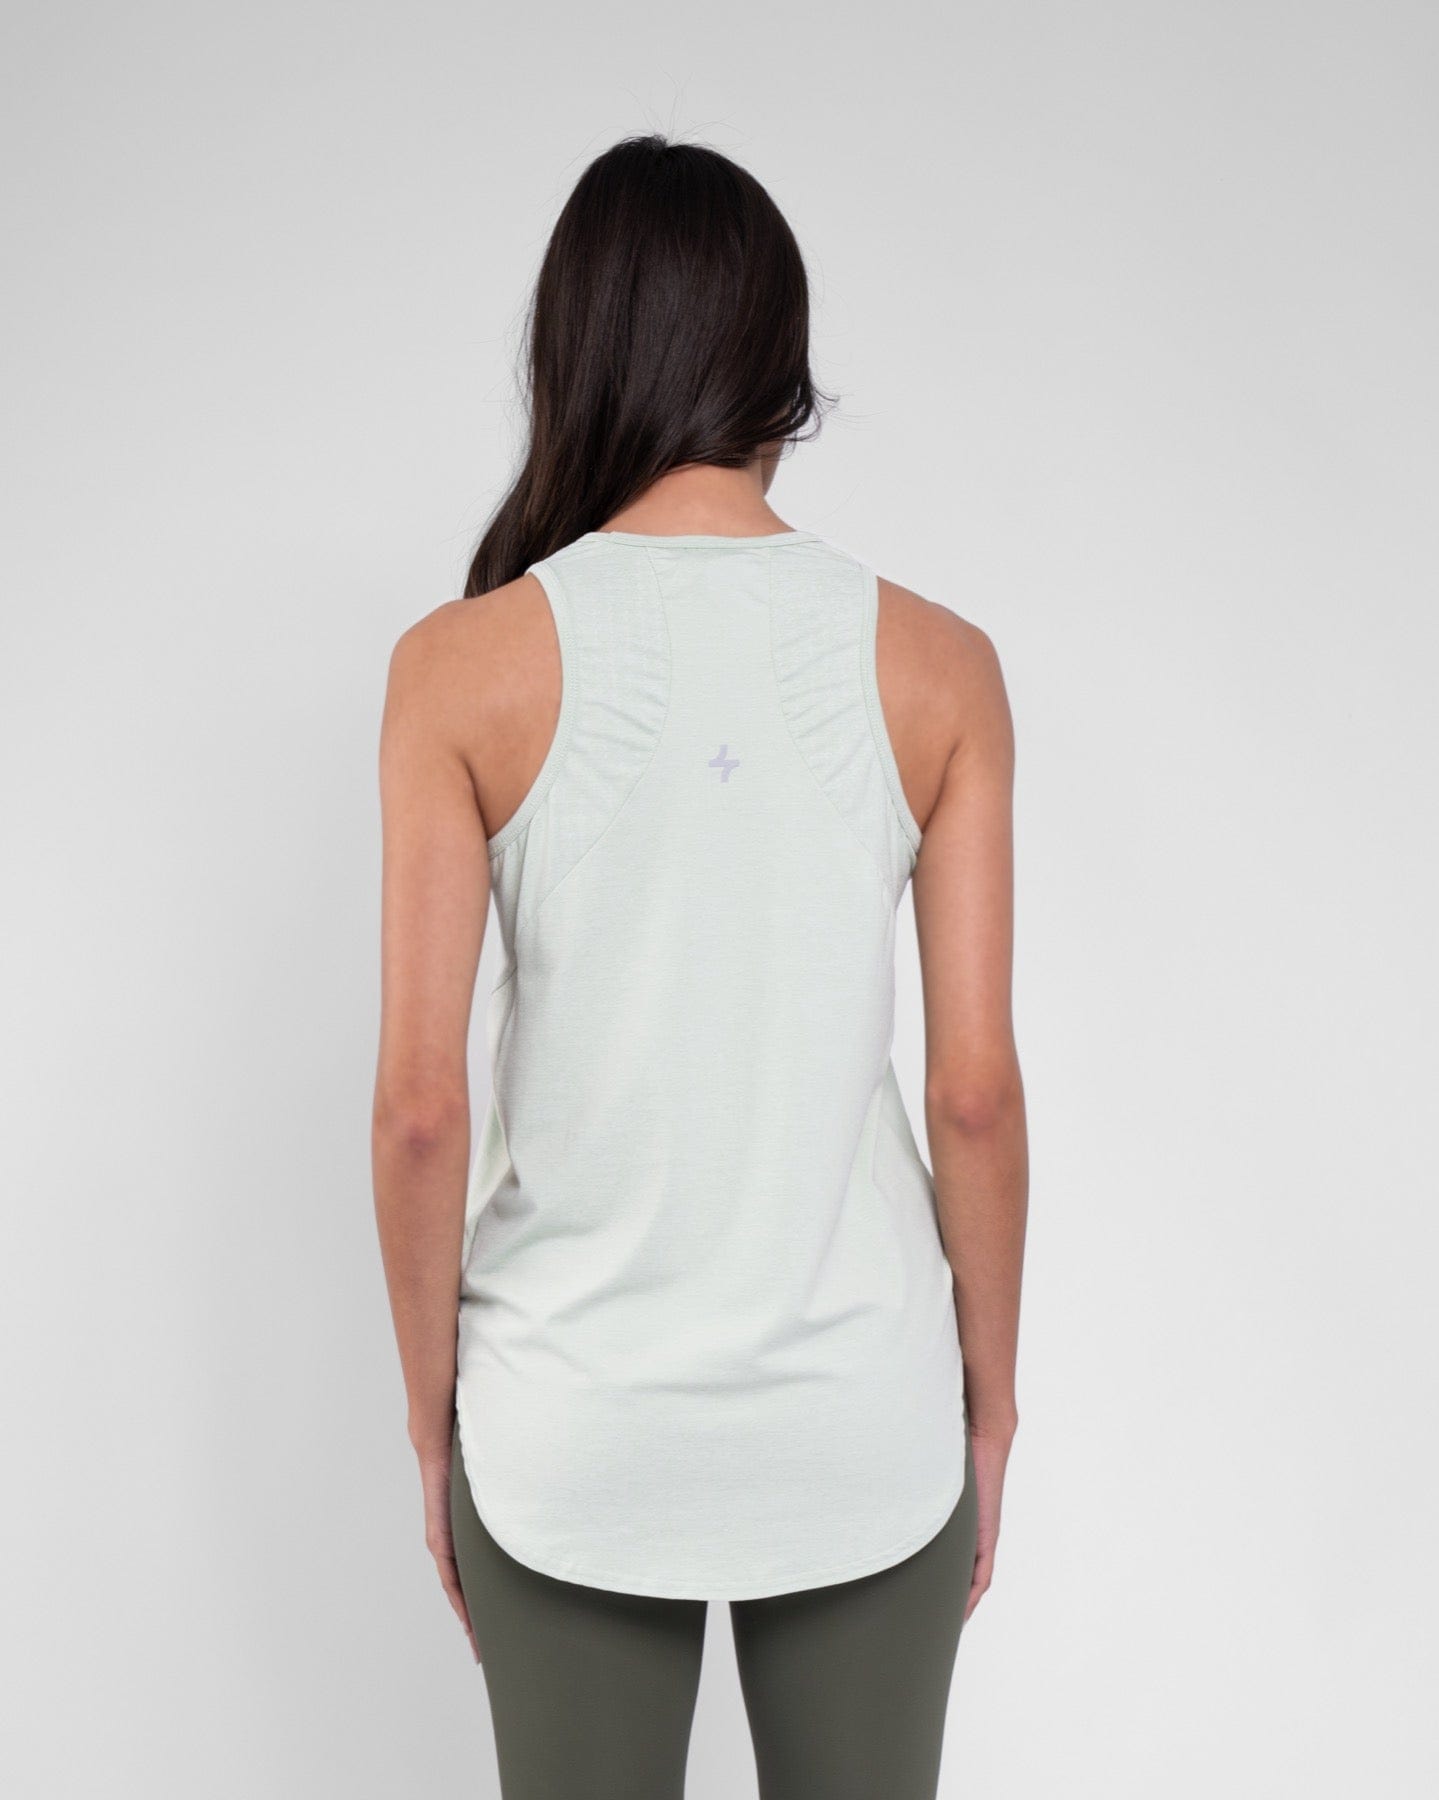 A woman standing with her back turned towards the camera, wearing a Sage modest activewear by qynda, sleeveless RUH TANK TOP and leggings against a neutral gray background